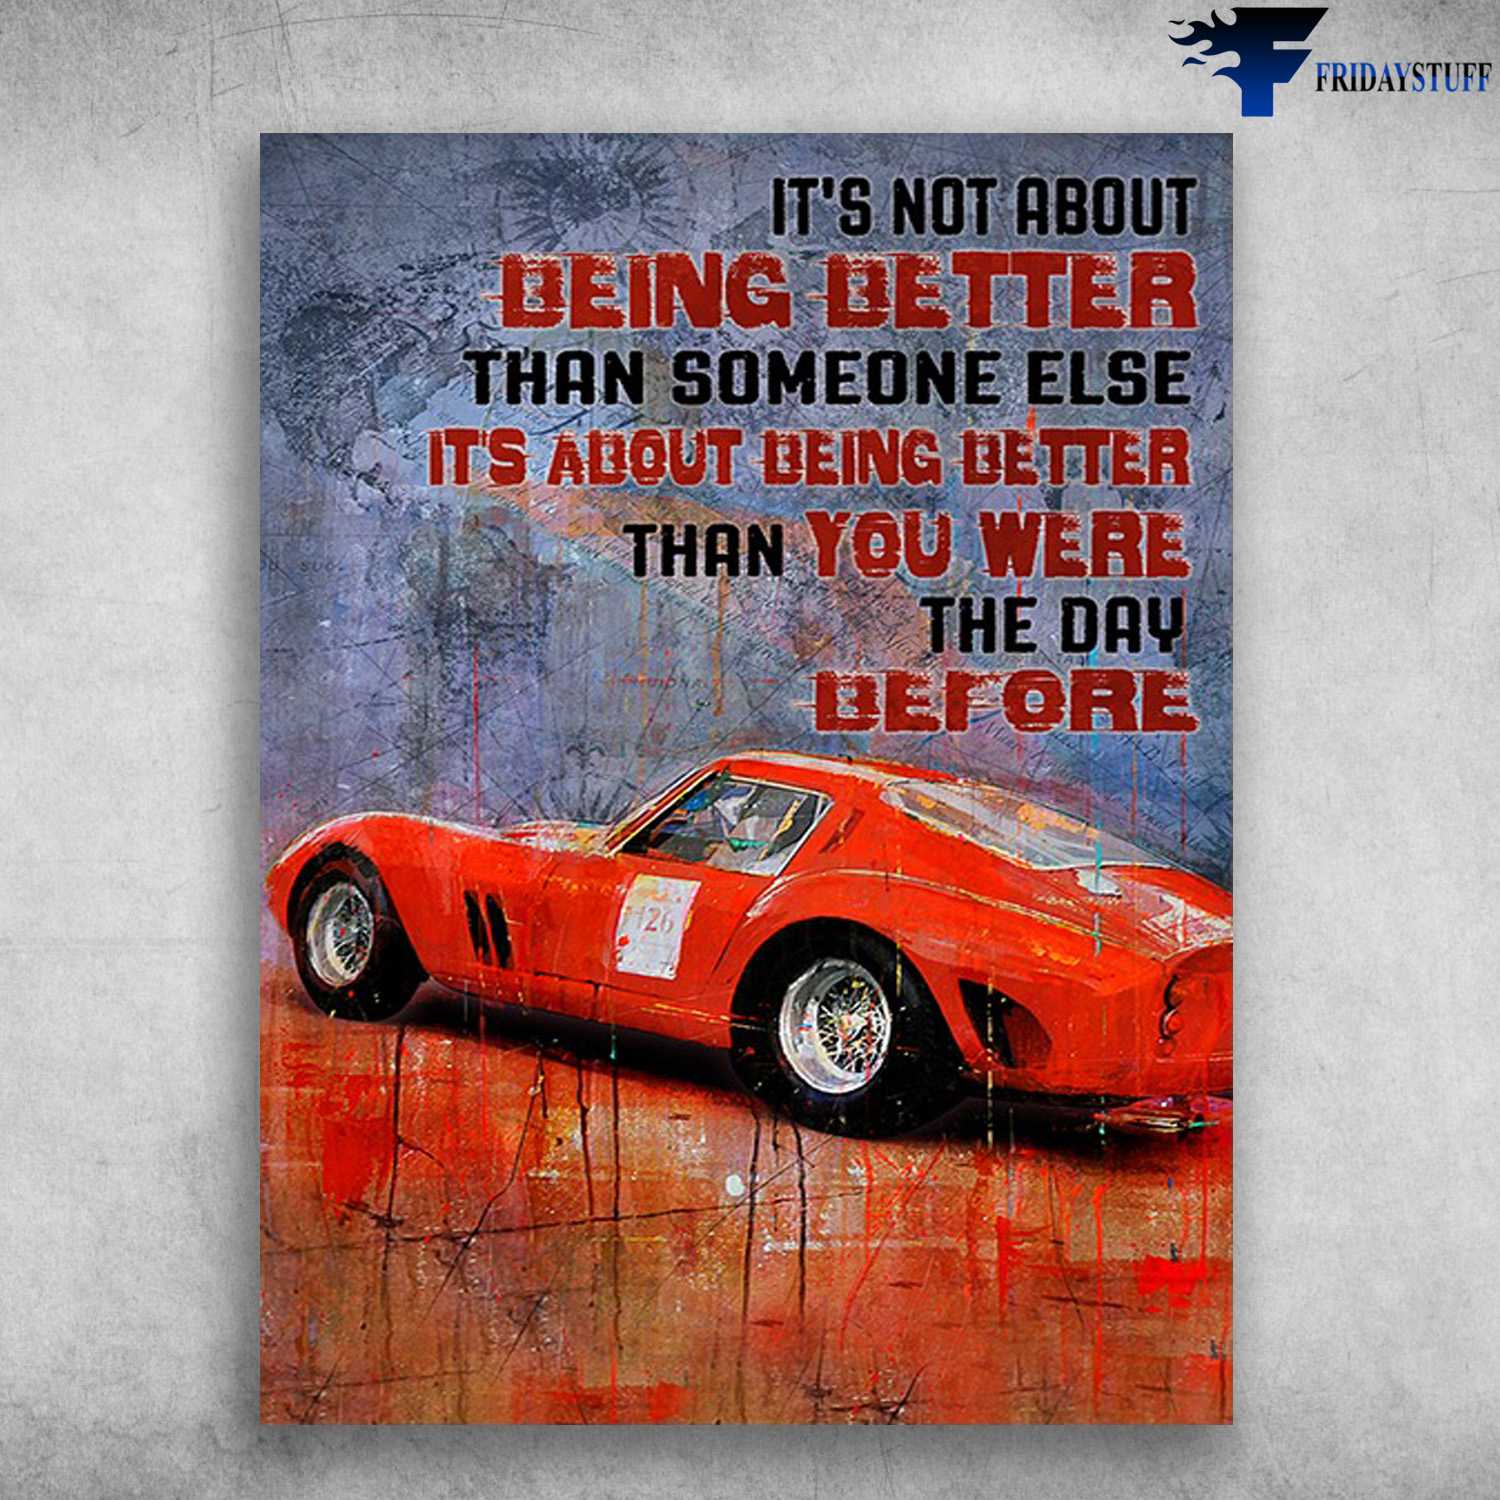 Car Driving, Car Lover - It's Not About Being Better, Than Someone Else, It's About Being Better, Than You Were The Day Before